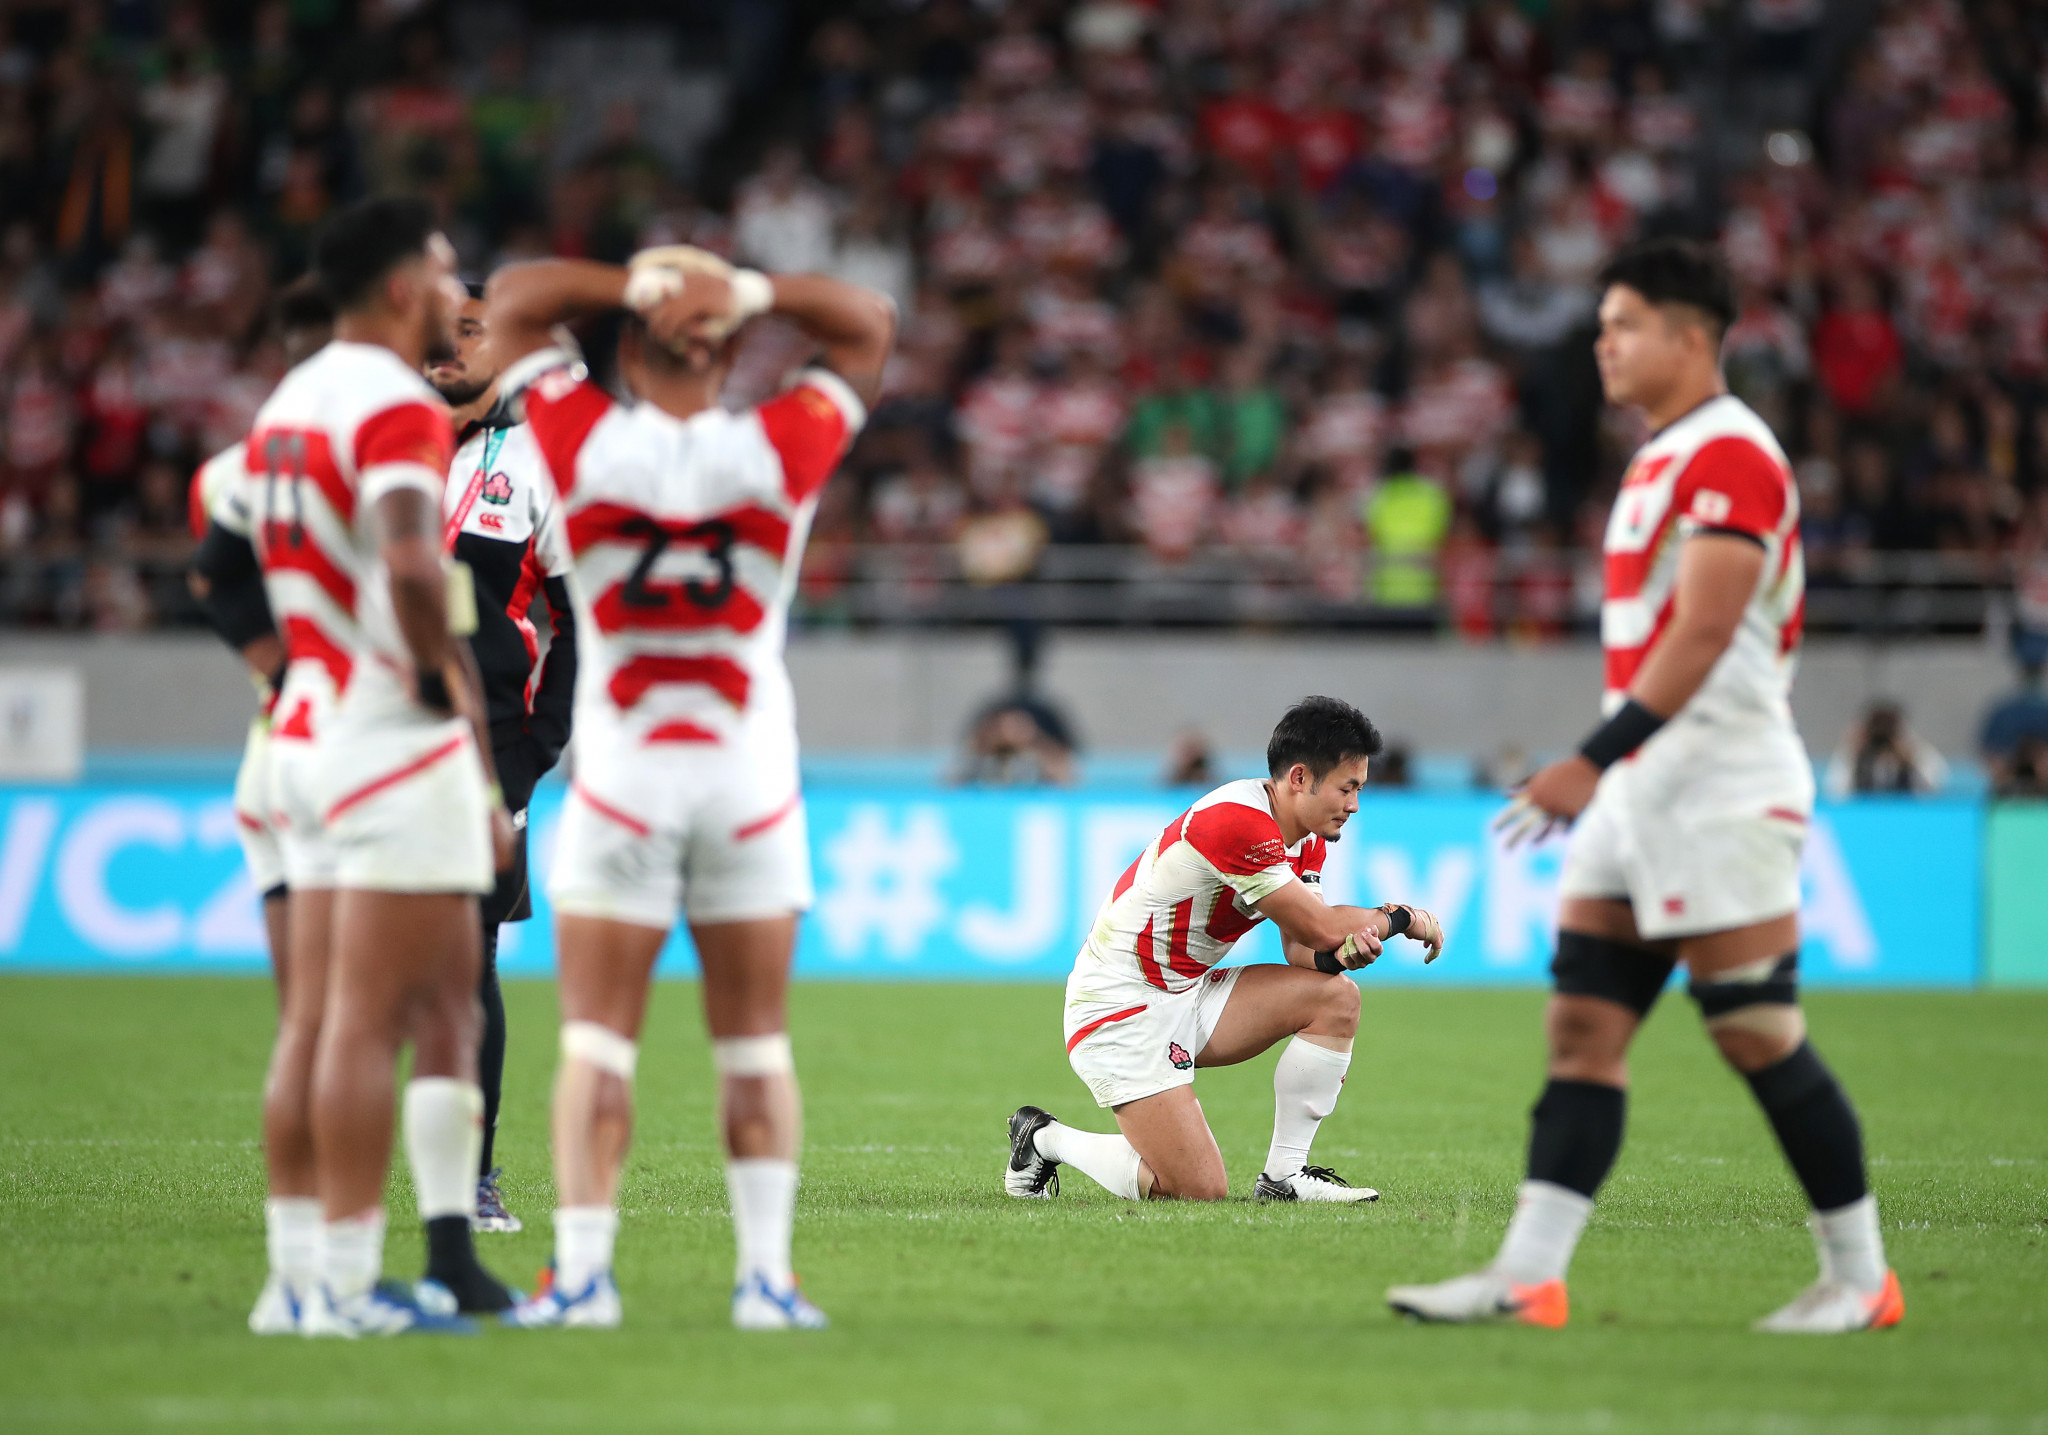 The Japanese side were visibly upset as the full-time whistle went and they were knocked out of the tournament at the quarter-final stage ©Getty Images